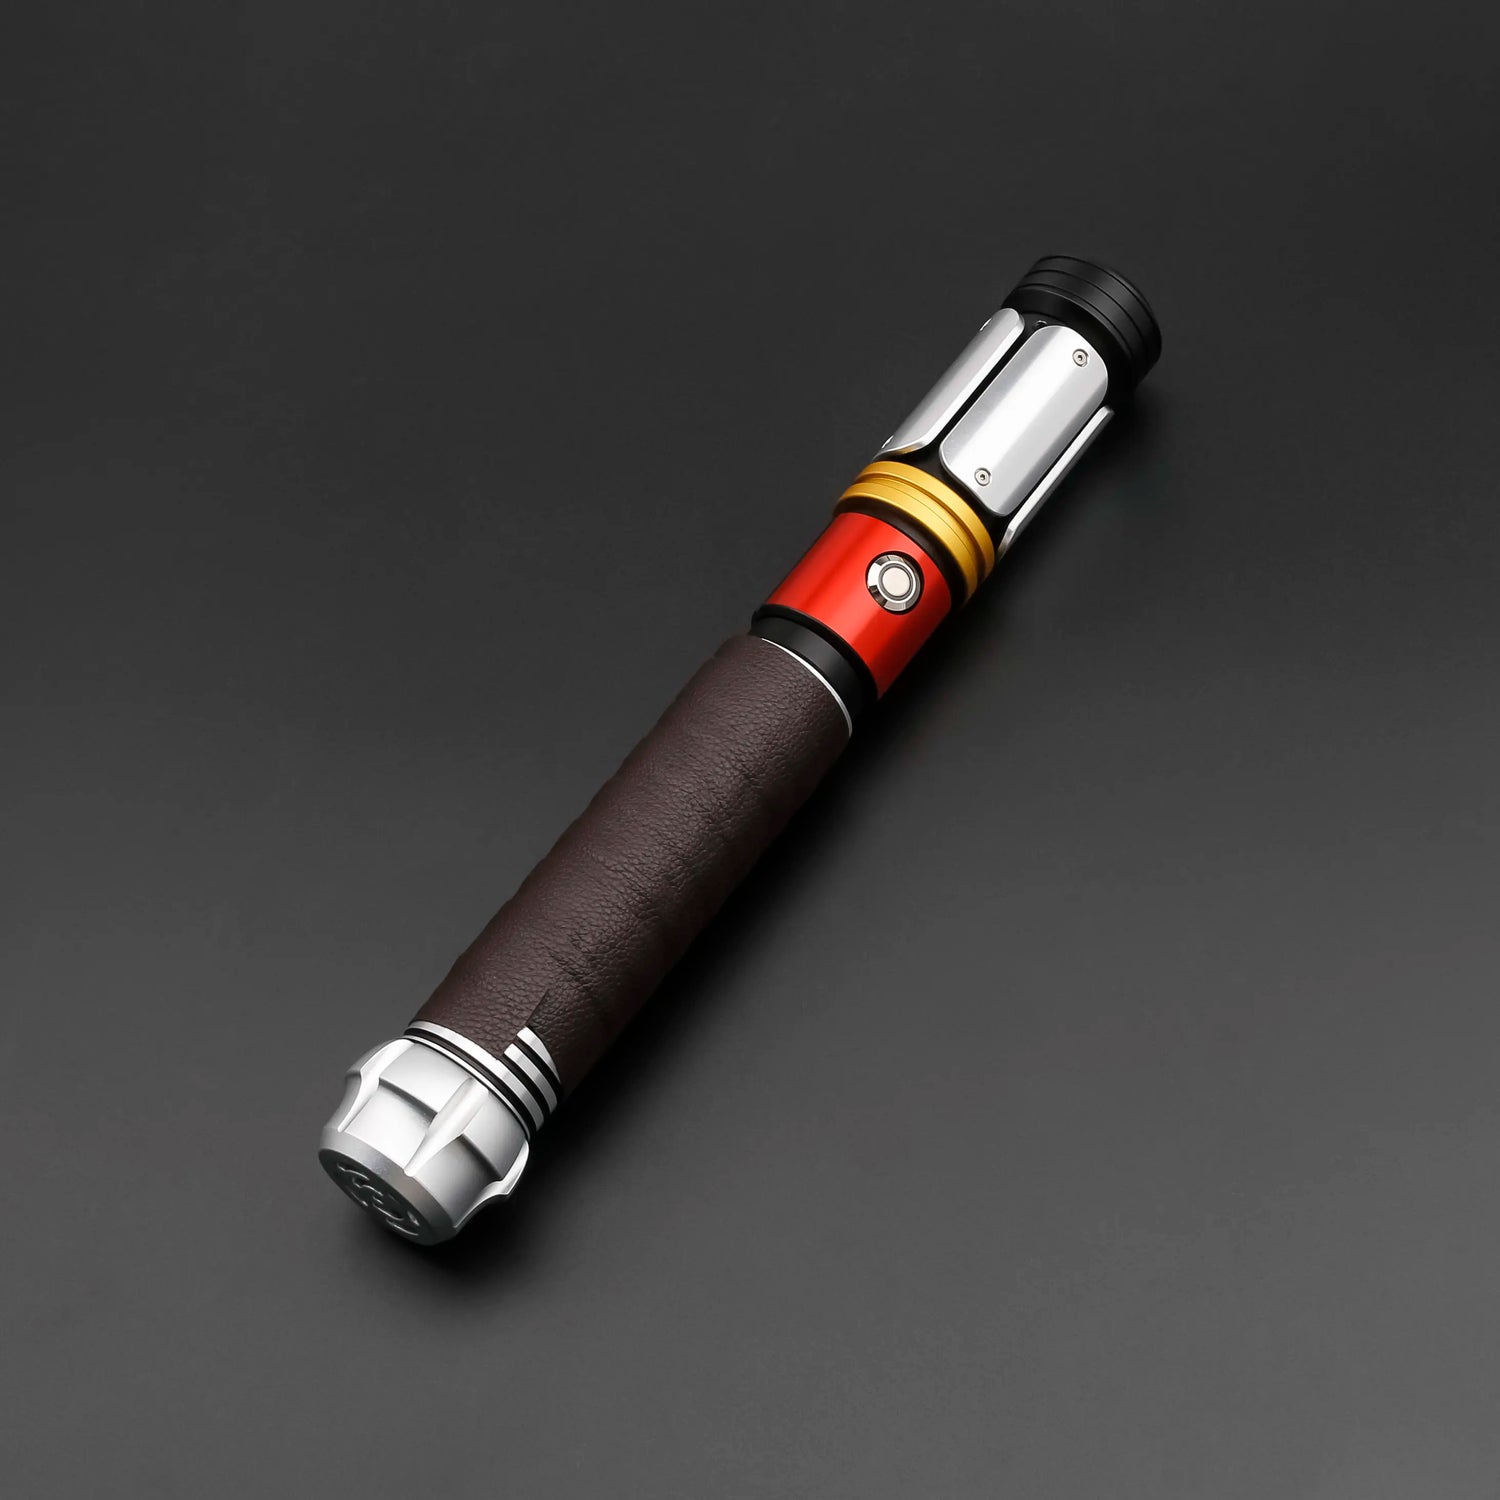 Partial view of Stunt lightsaber